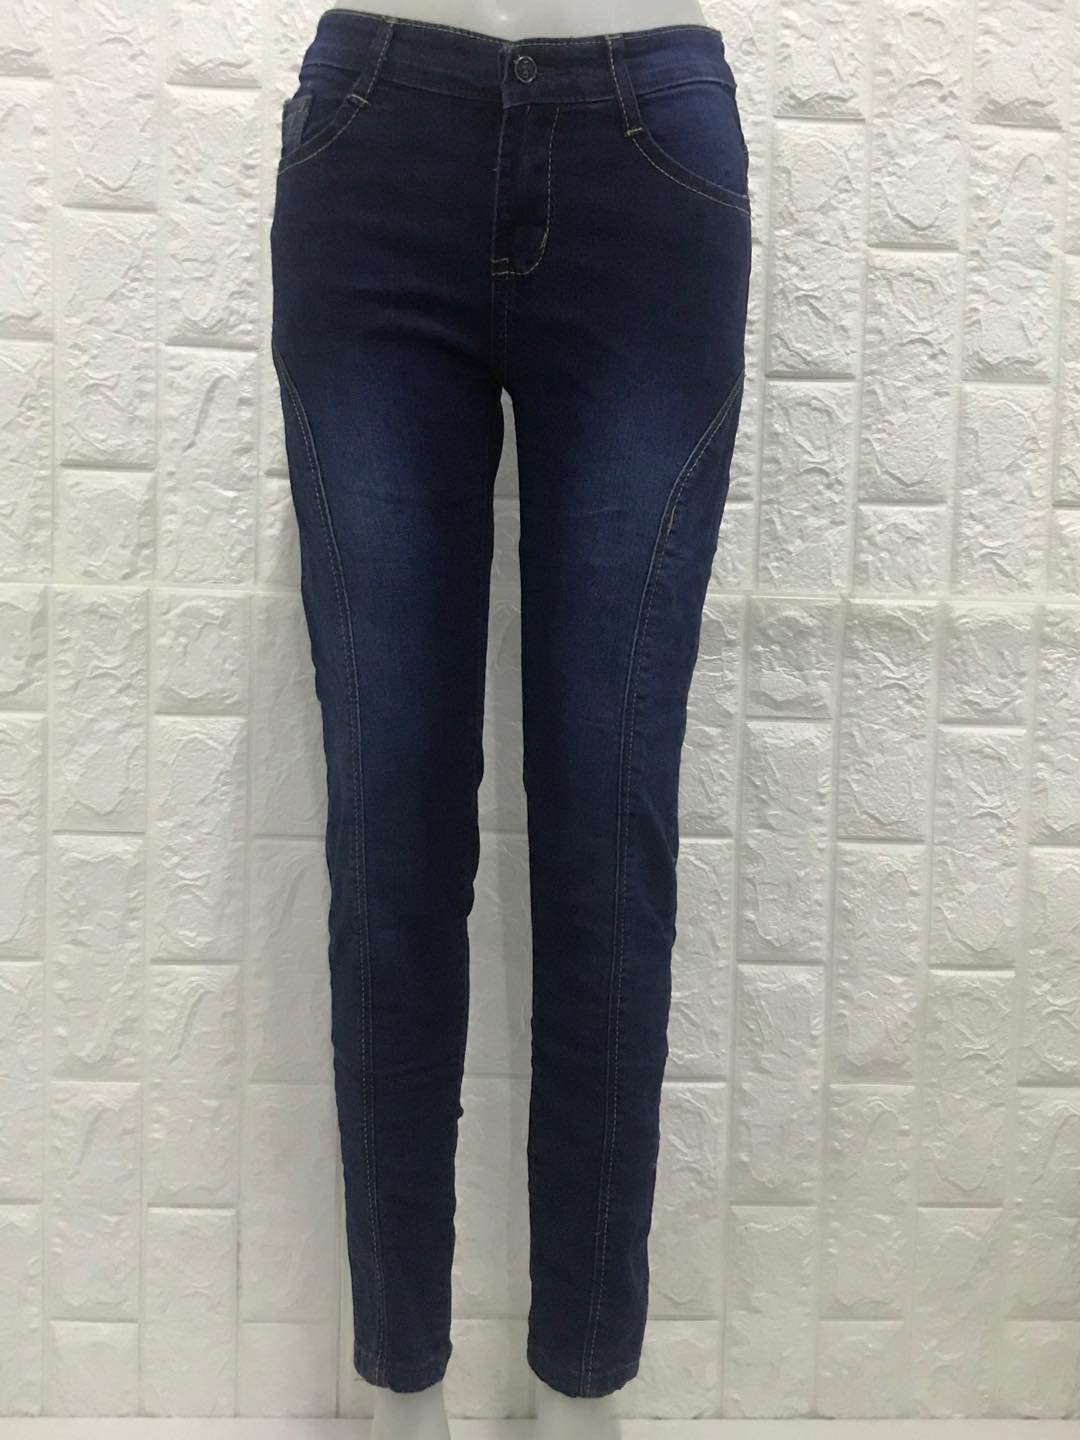 navy blue jeans womens